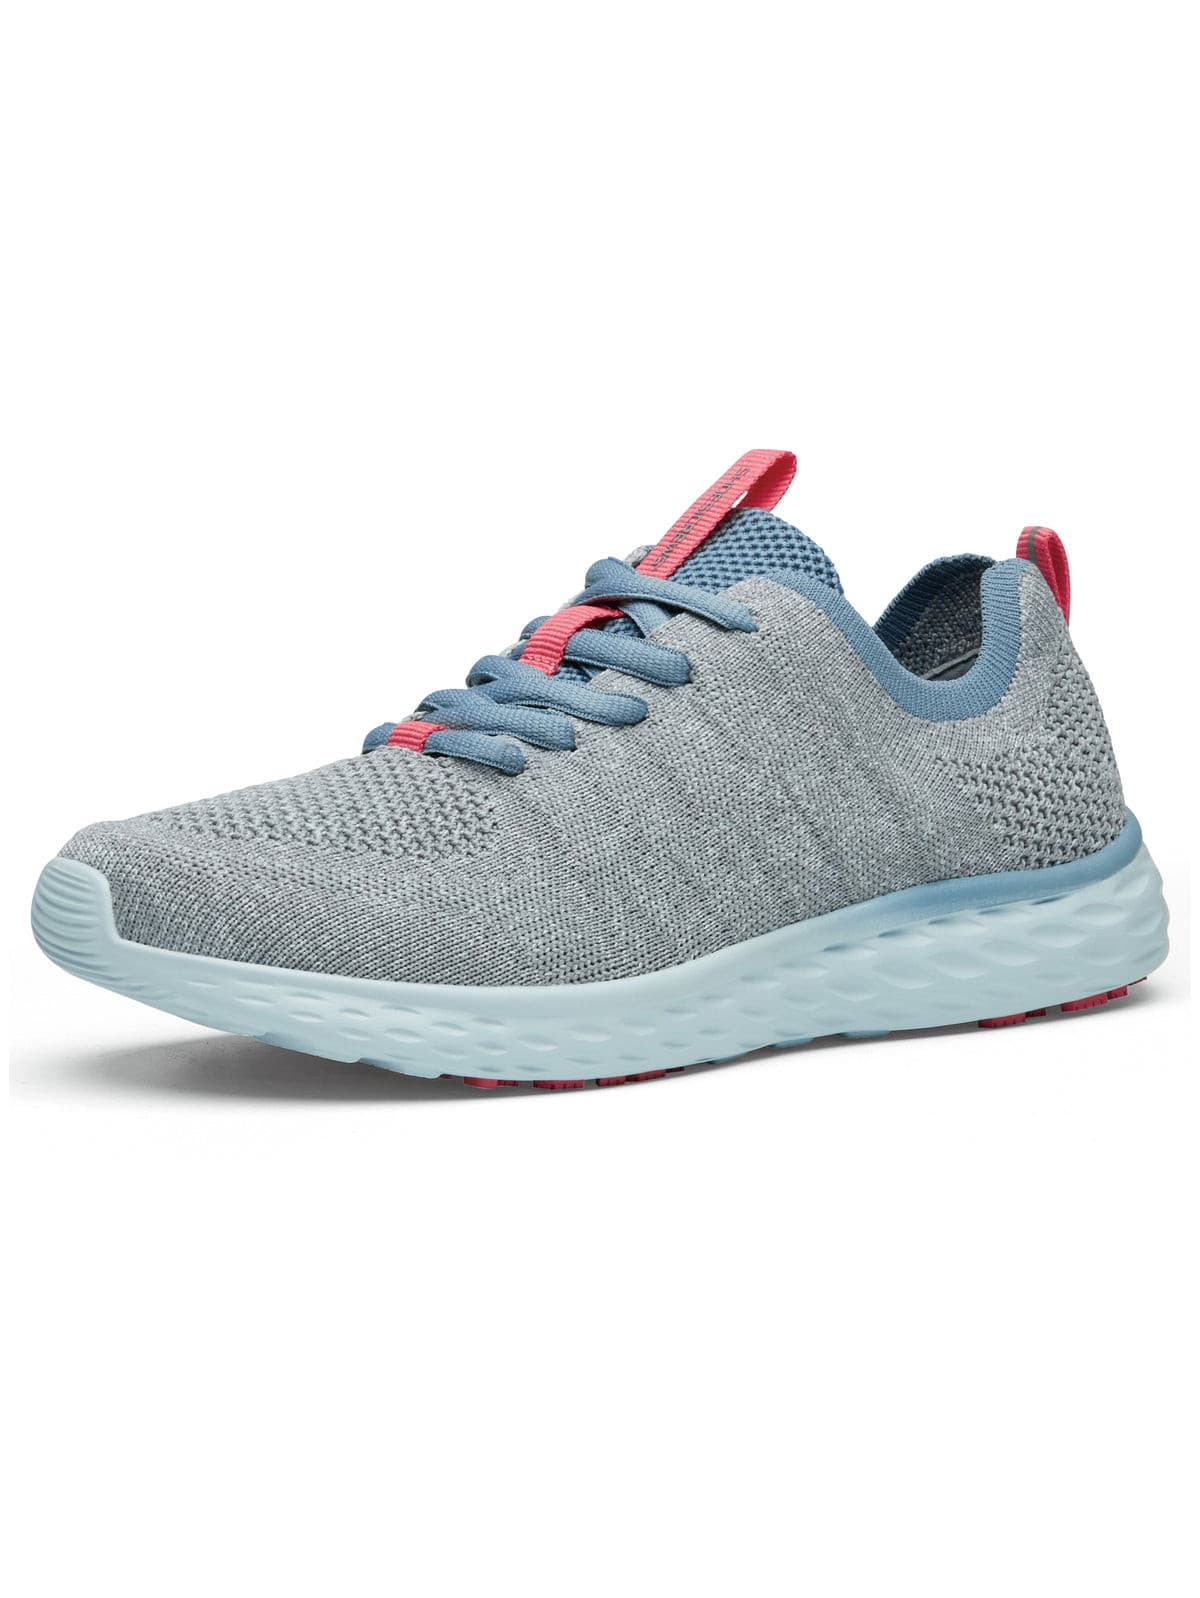 Women's Work Shoe Everlight Gray Blue Coral by Shoes For Crews -  ChefsCotton